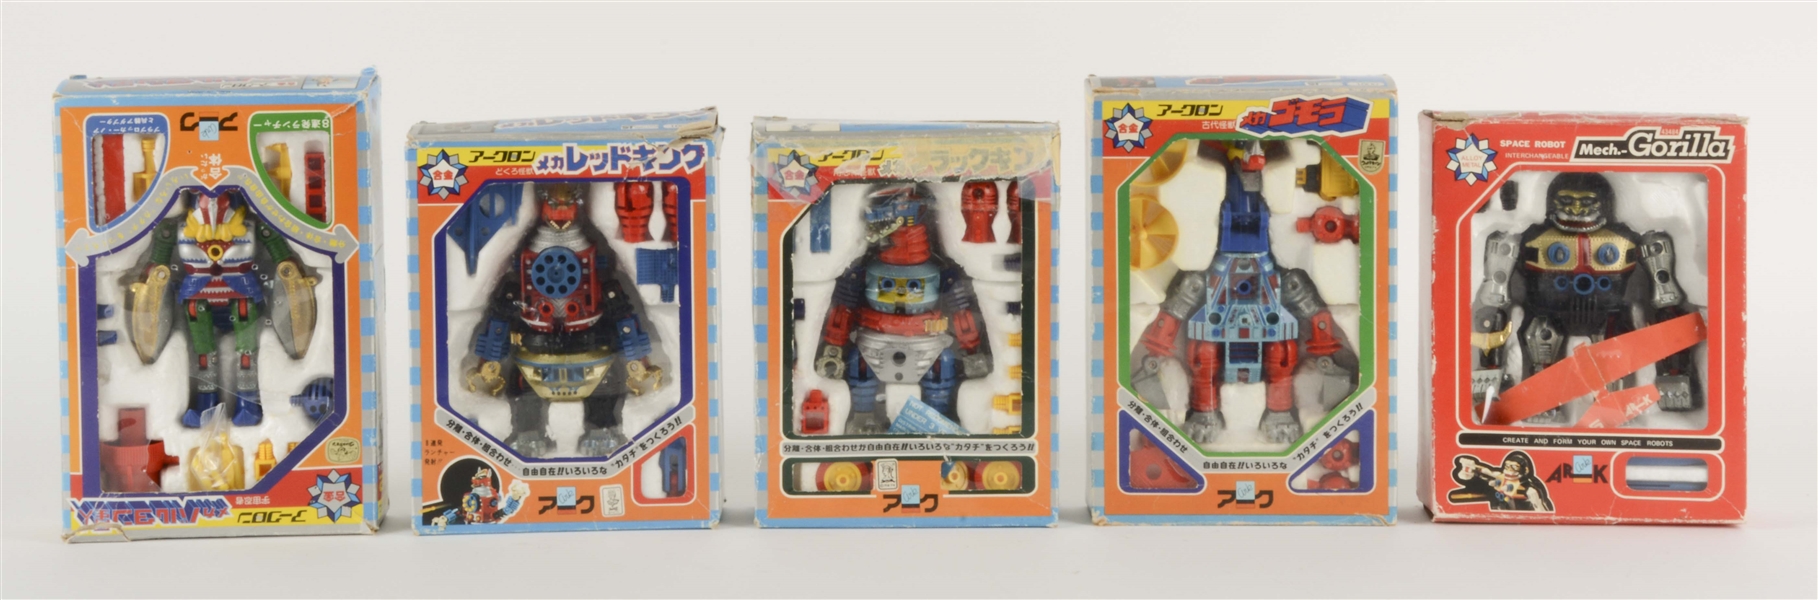 LOT OF 5: 1907S JAPANESE ARK DIE-CAST CHARACTER TOYS IN BOXES. 